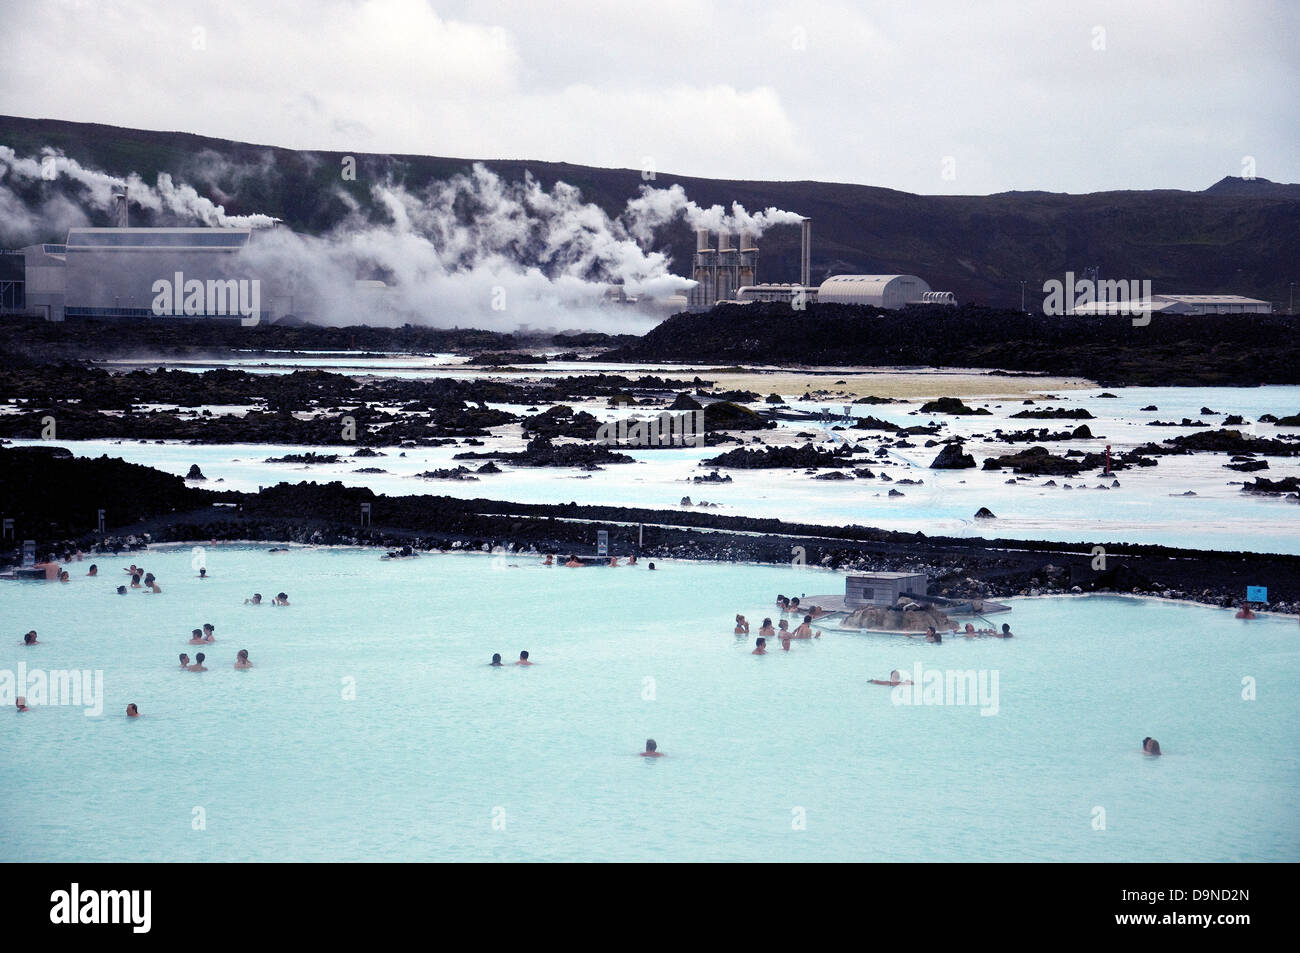 Iceland's famous Blue Lagoon, popular swimming lake in the foreground, the Svartsengi geothermal energy plant at rear Stock Photo